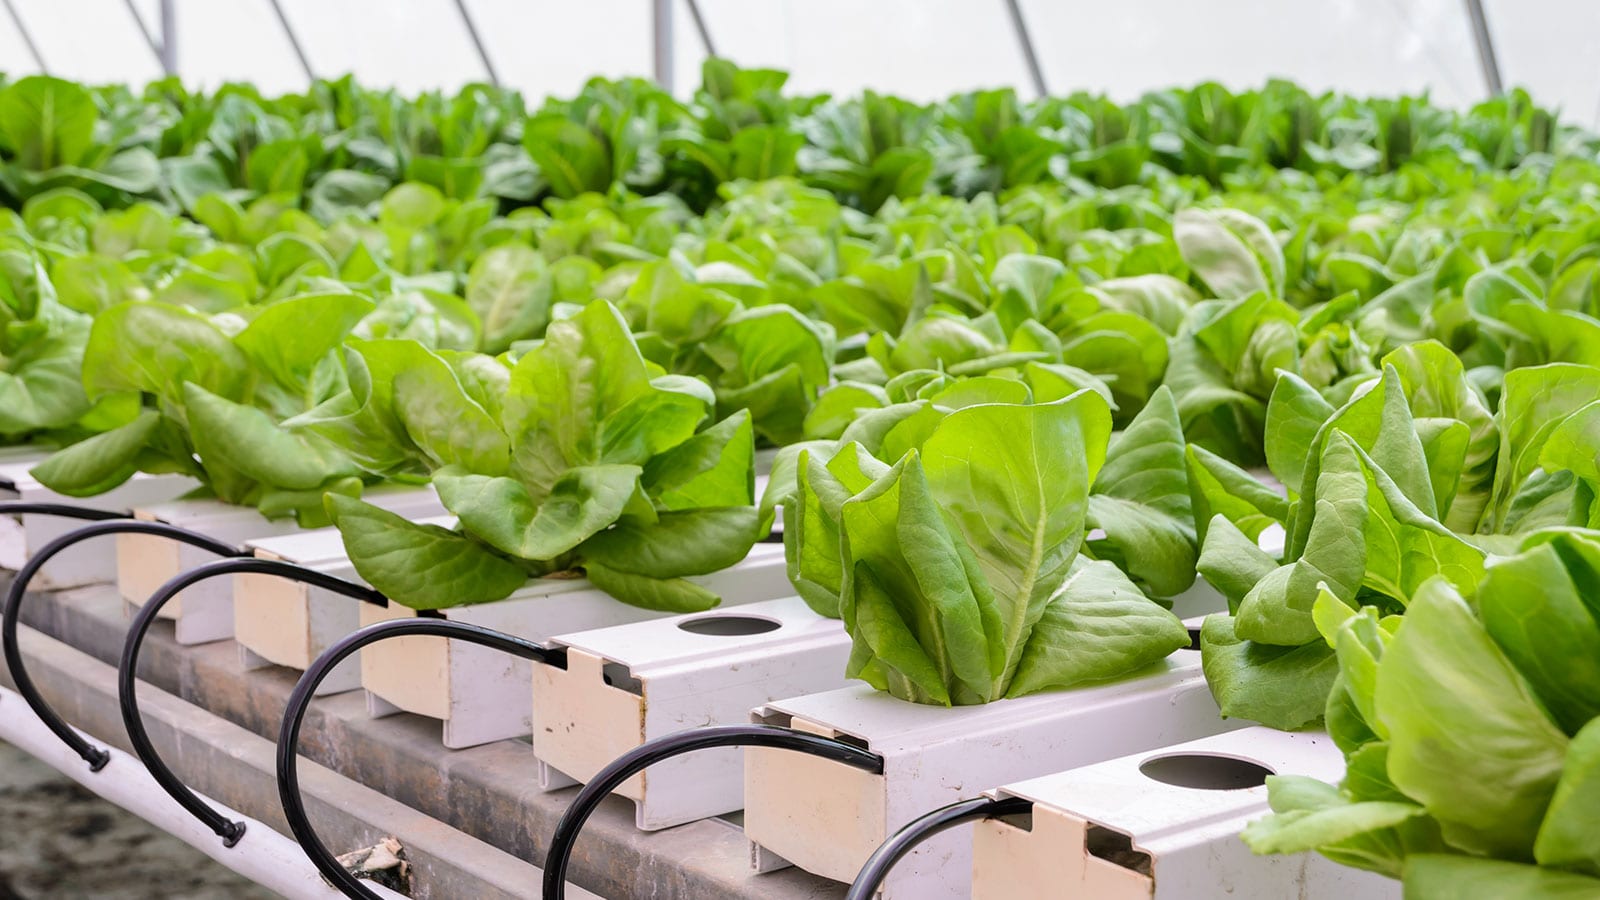 Hydroponic butter leaf lettuce growing in a greenhouse.